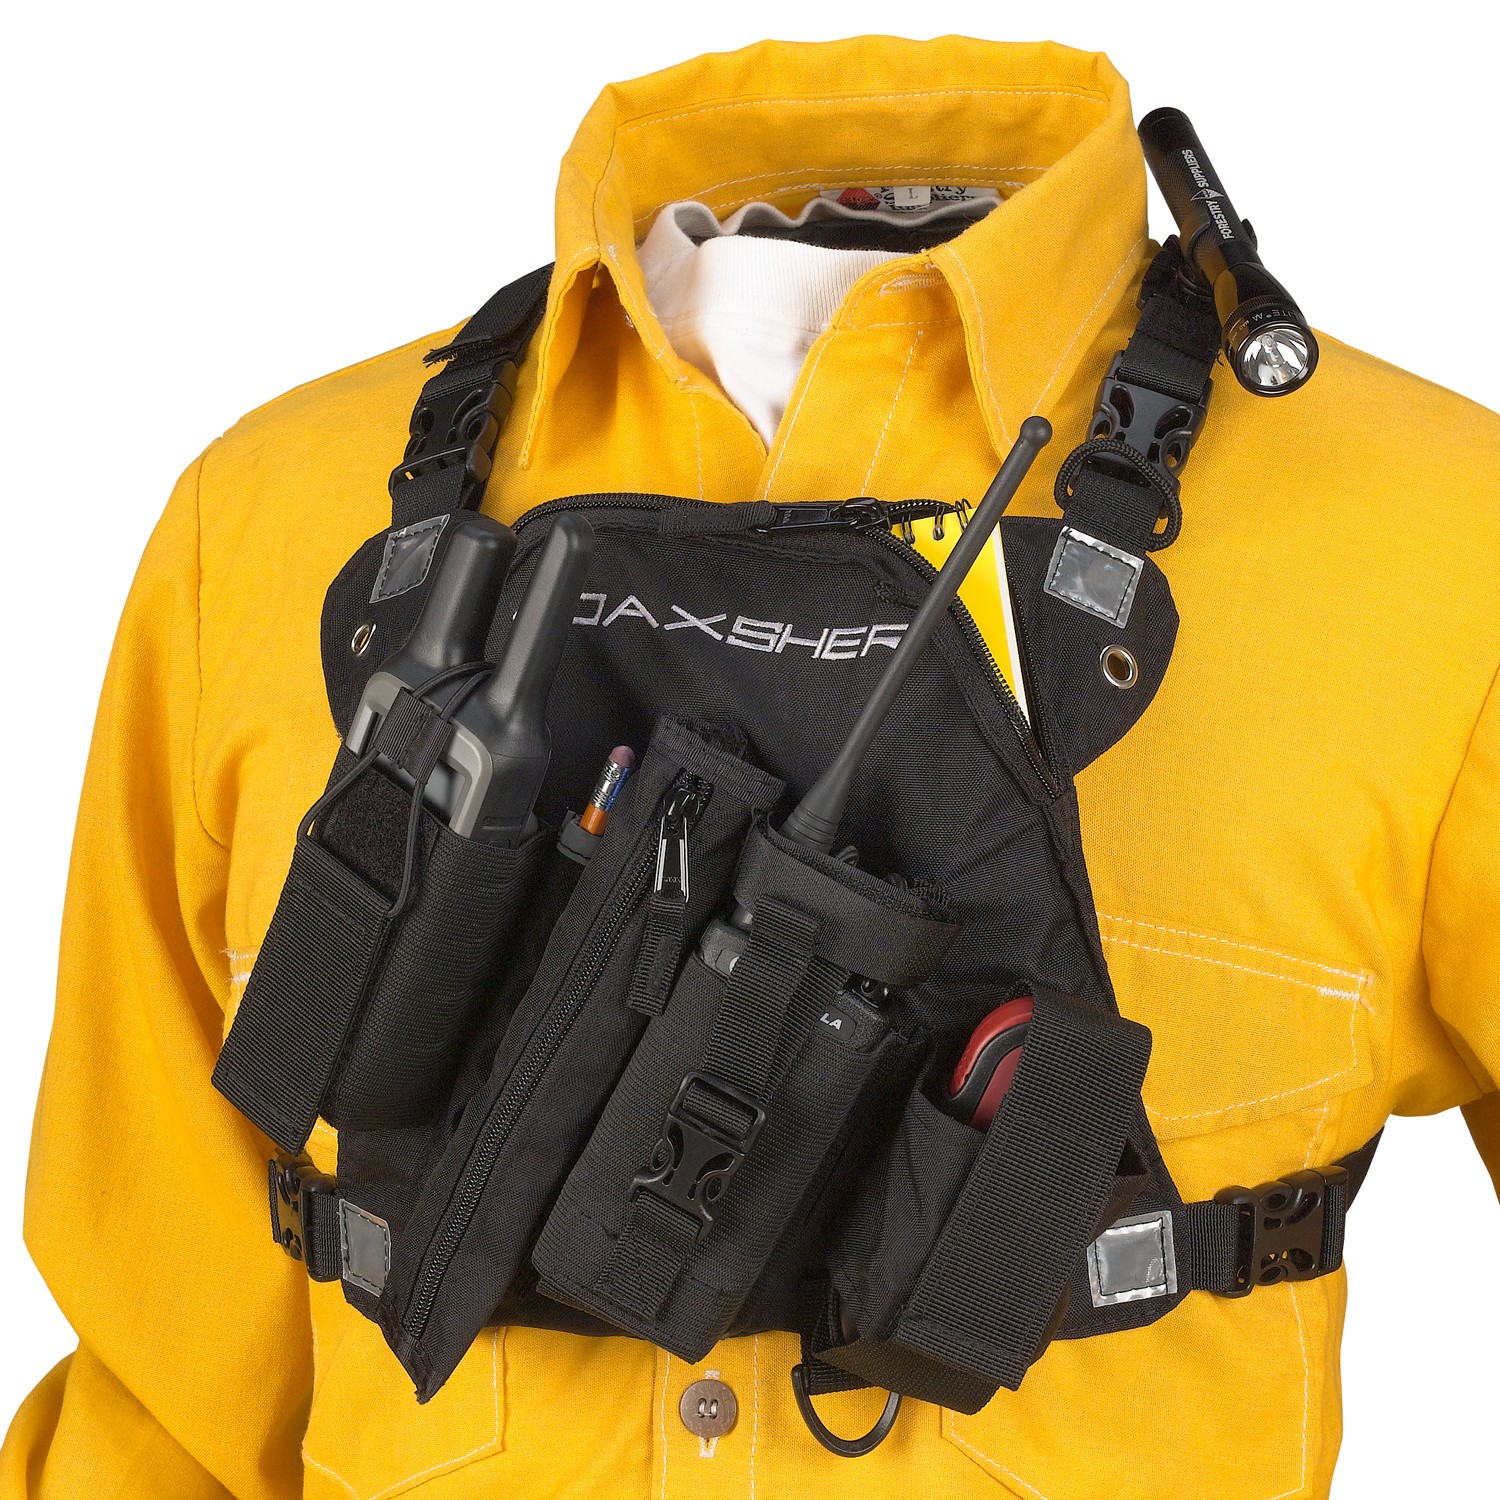 Coaxsher RCP-1 Pro Radio Chest Harness | Forestry Suppliers, Inc.